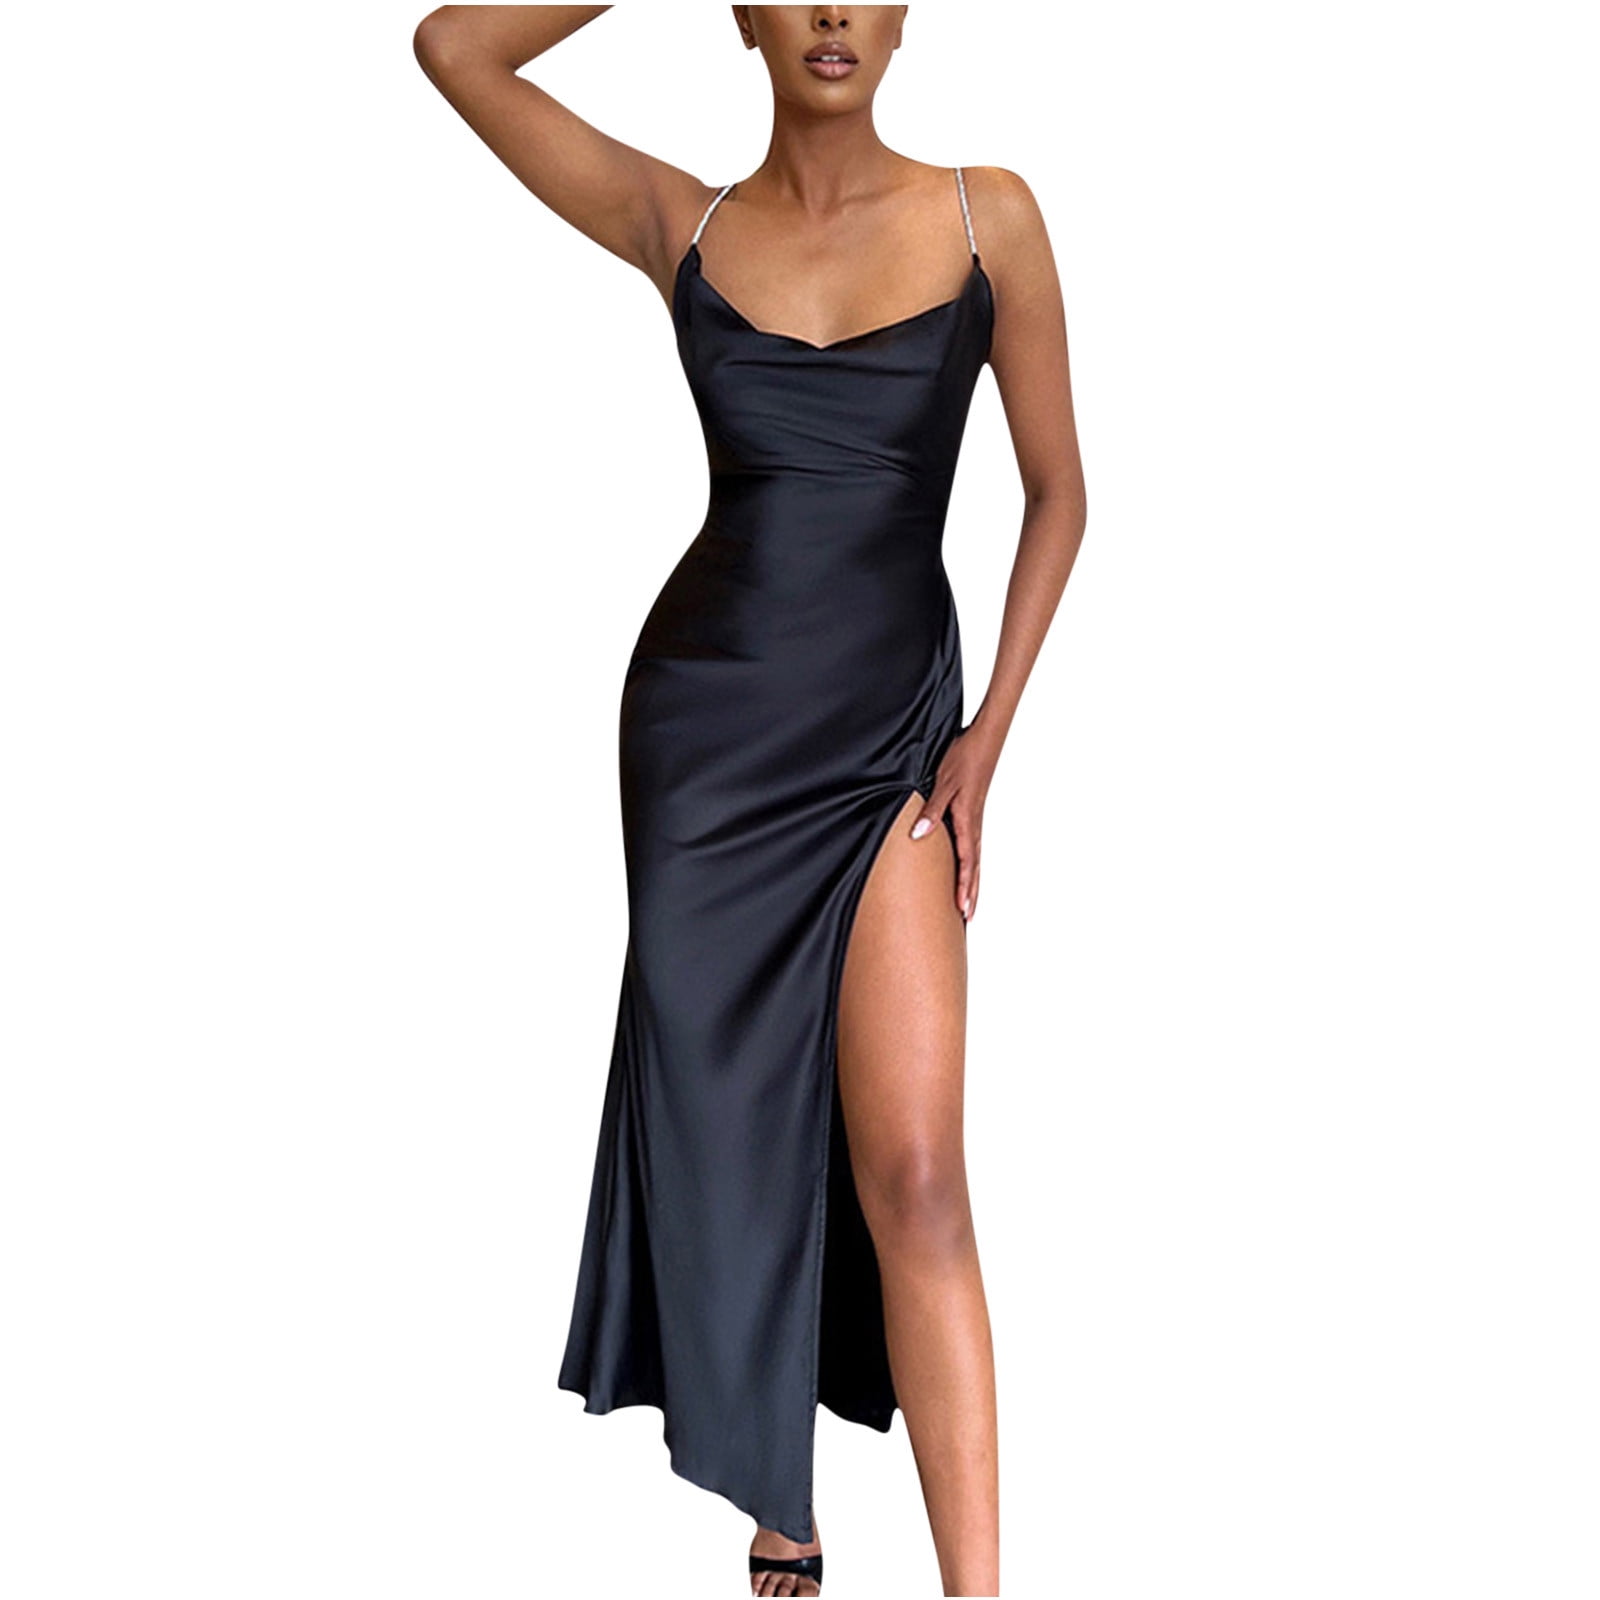 Ernkv Women's Ankle Bodycon Cami Dress Clearance Solid Color Satin